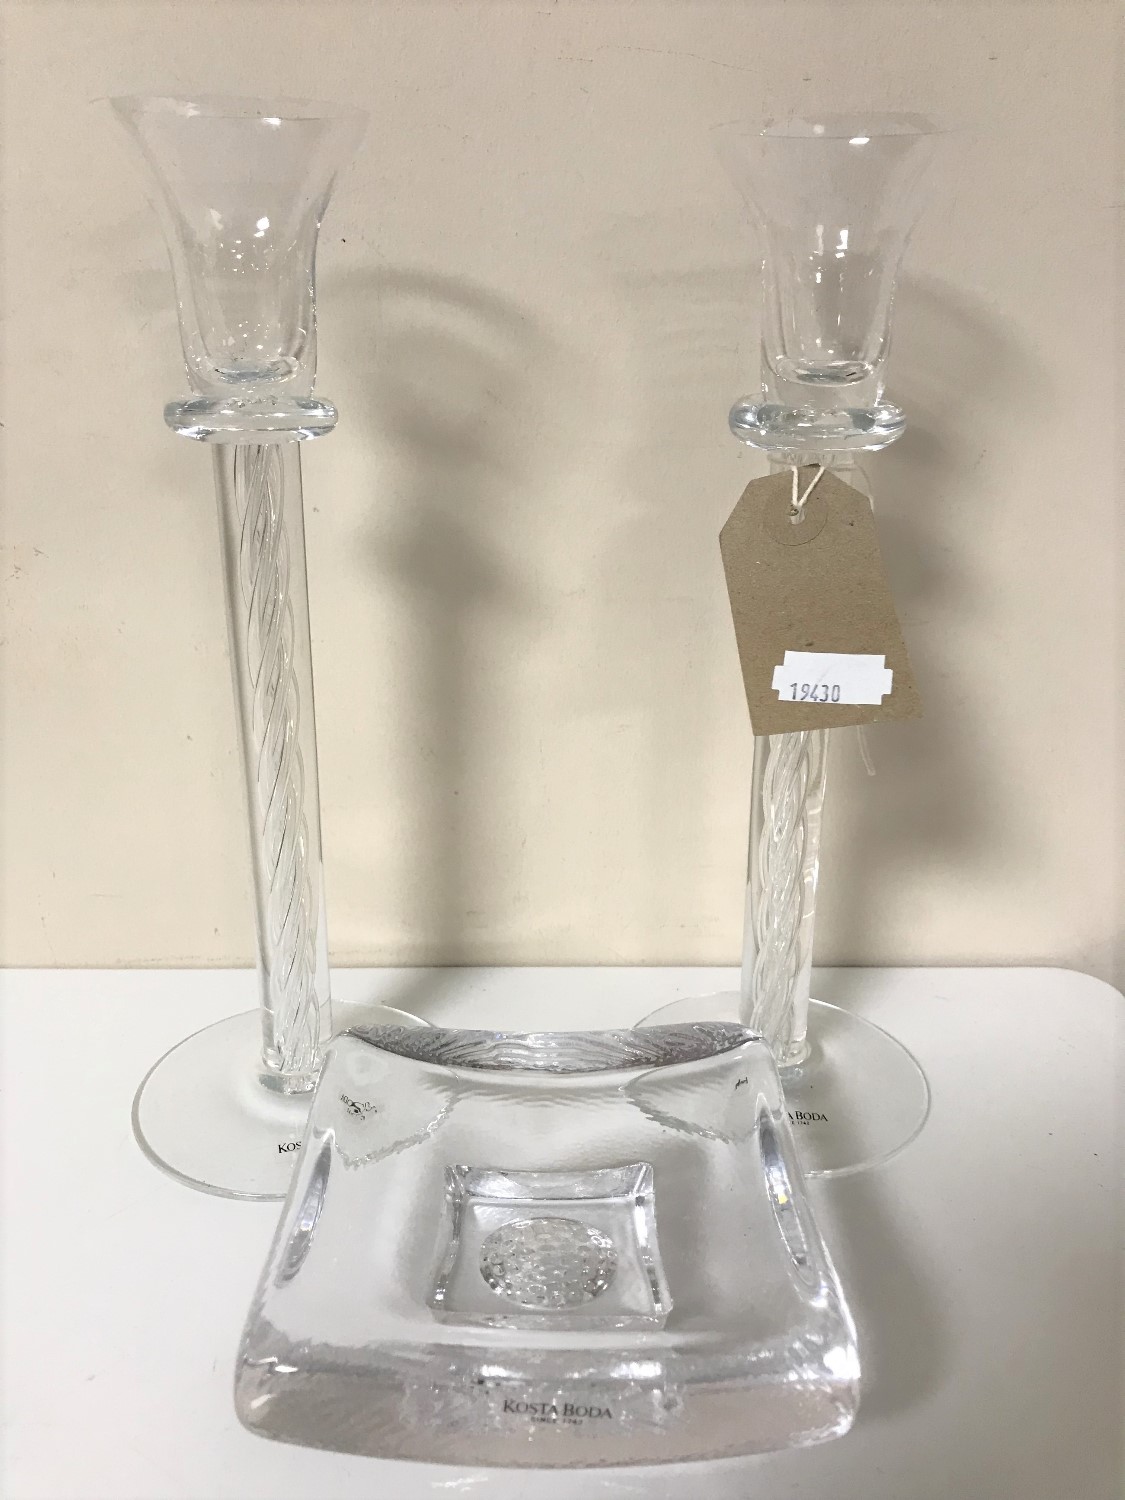 A pair of Kosta Boda twist stem glass candlesticks together with a glass ashtray